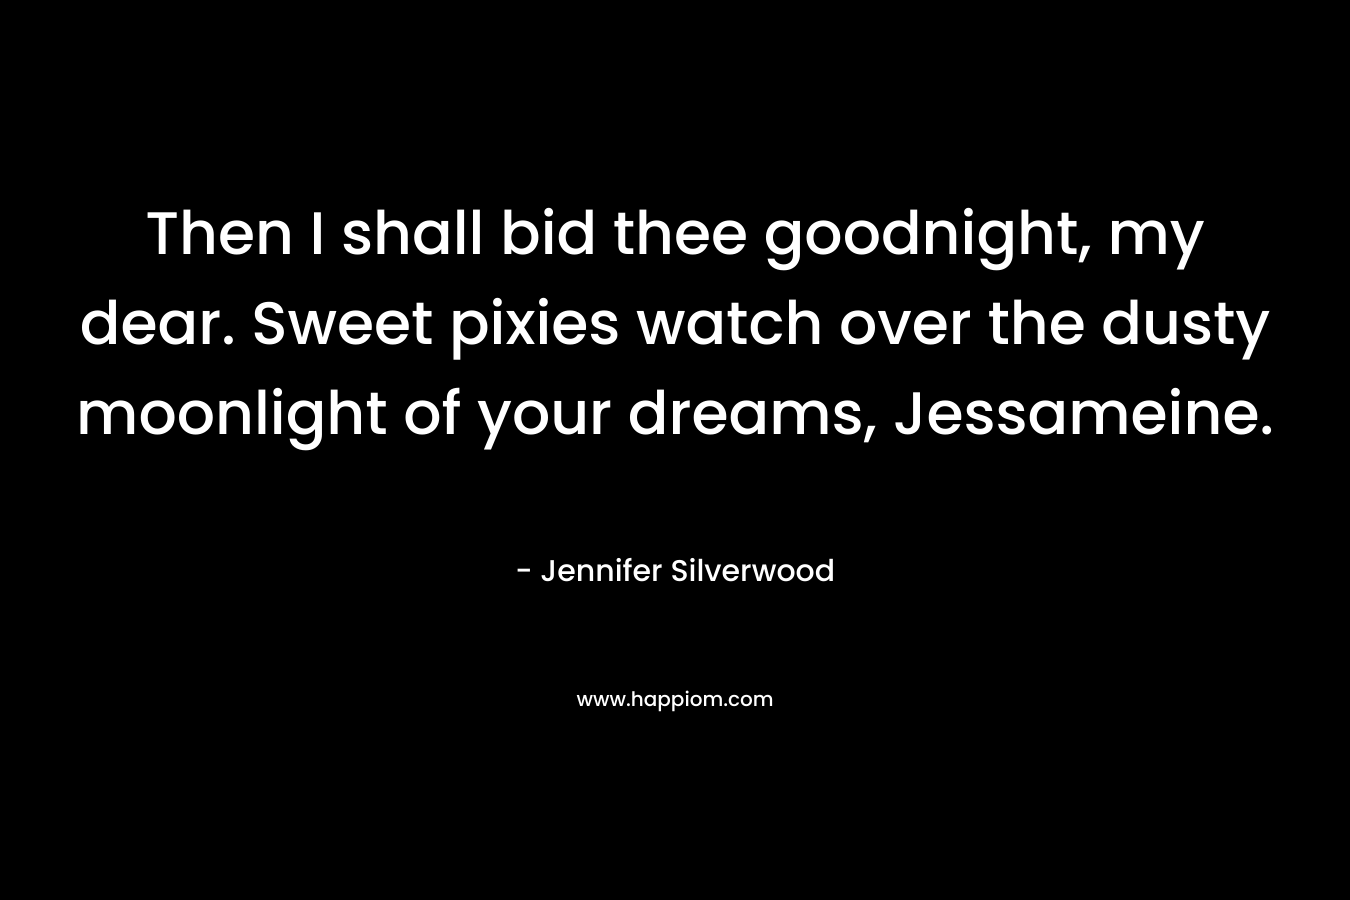 Then I shall bid thee goodnight, my dear. Sweet pixies watch over the dusty moonlight of your dreams, Jessameine.